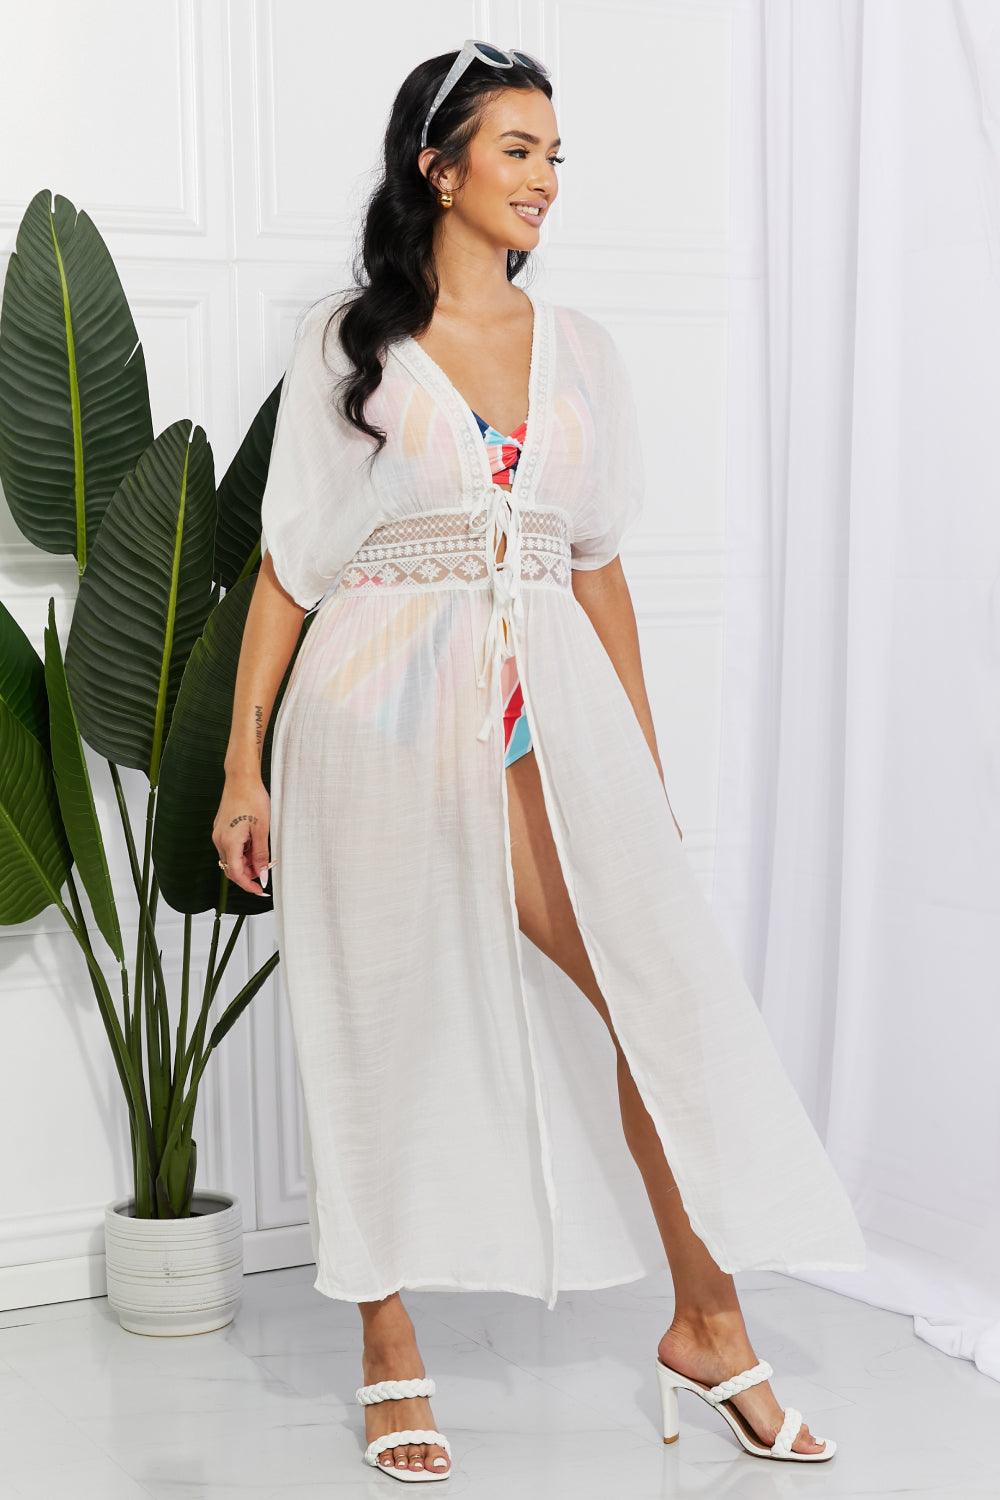 Marina West Swim Sun Goddess Tied Maxi Cover-Up - God's Girl Gifts And Apparel